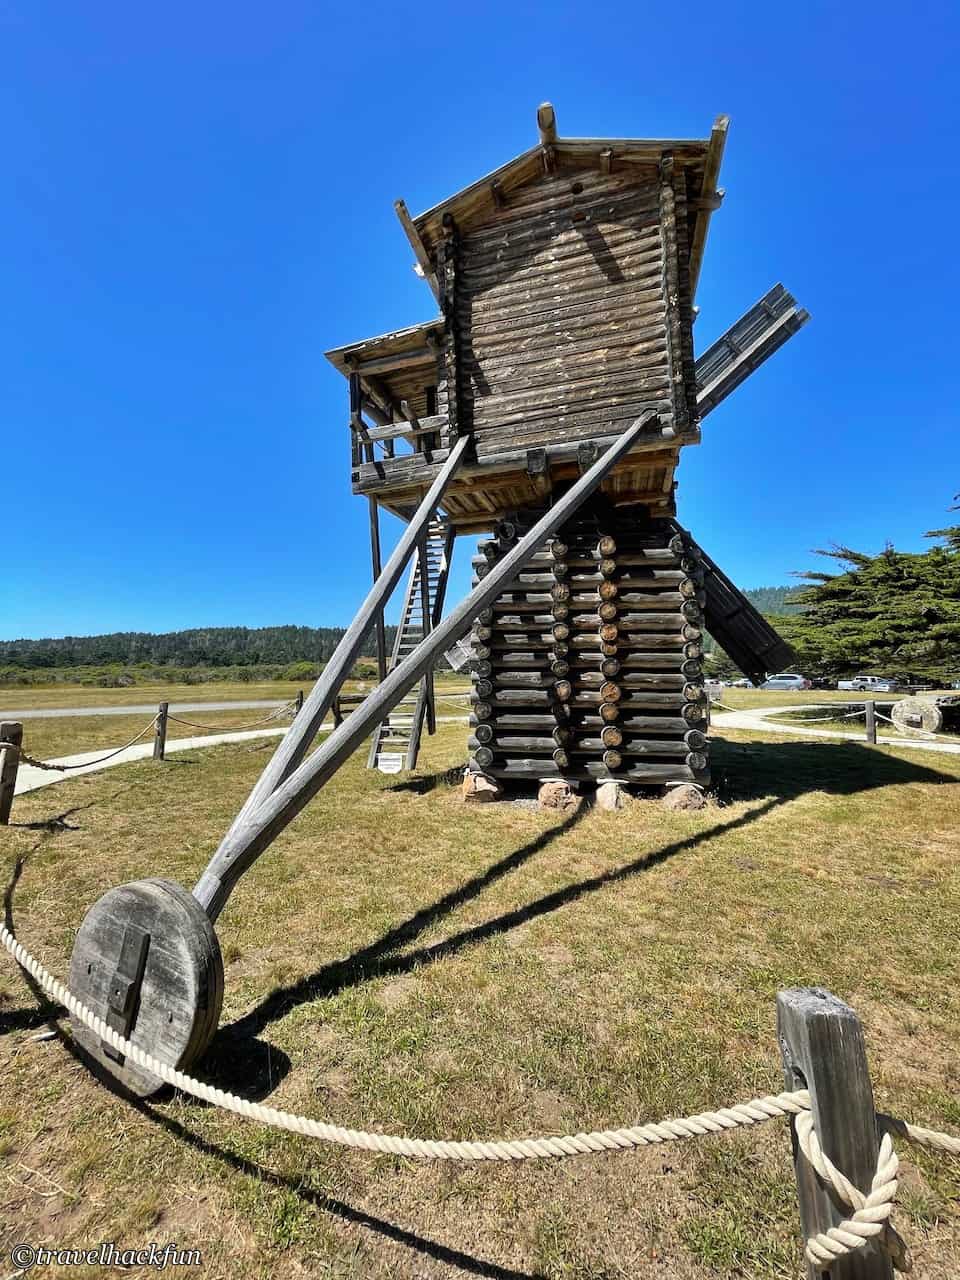 Fort Ross,俄羅斯堡,fort ross state park,fort ross state historic park,fort ross california 46